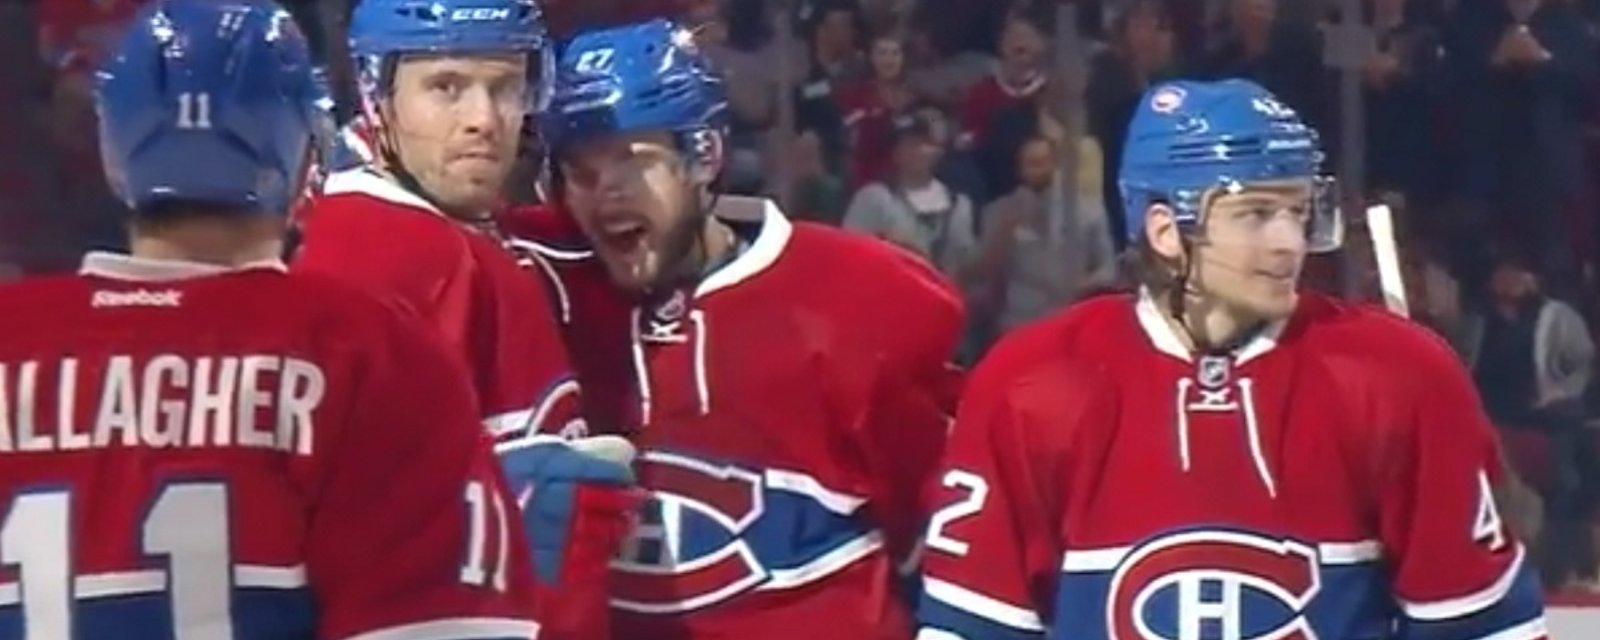 Shea Weber nets his first goal as a member of the Montreal Canadiens!